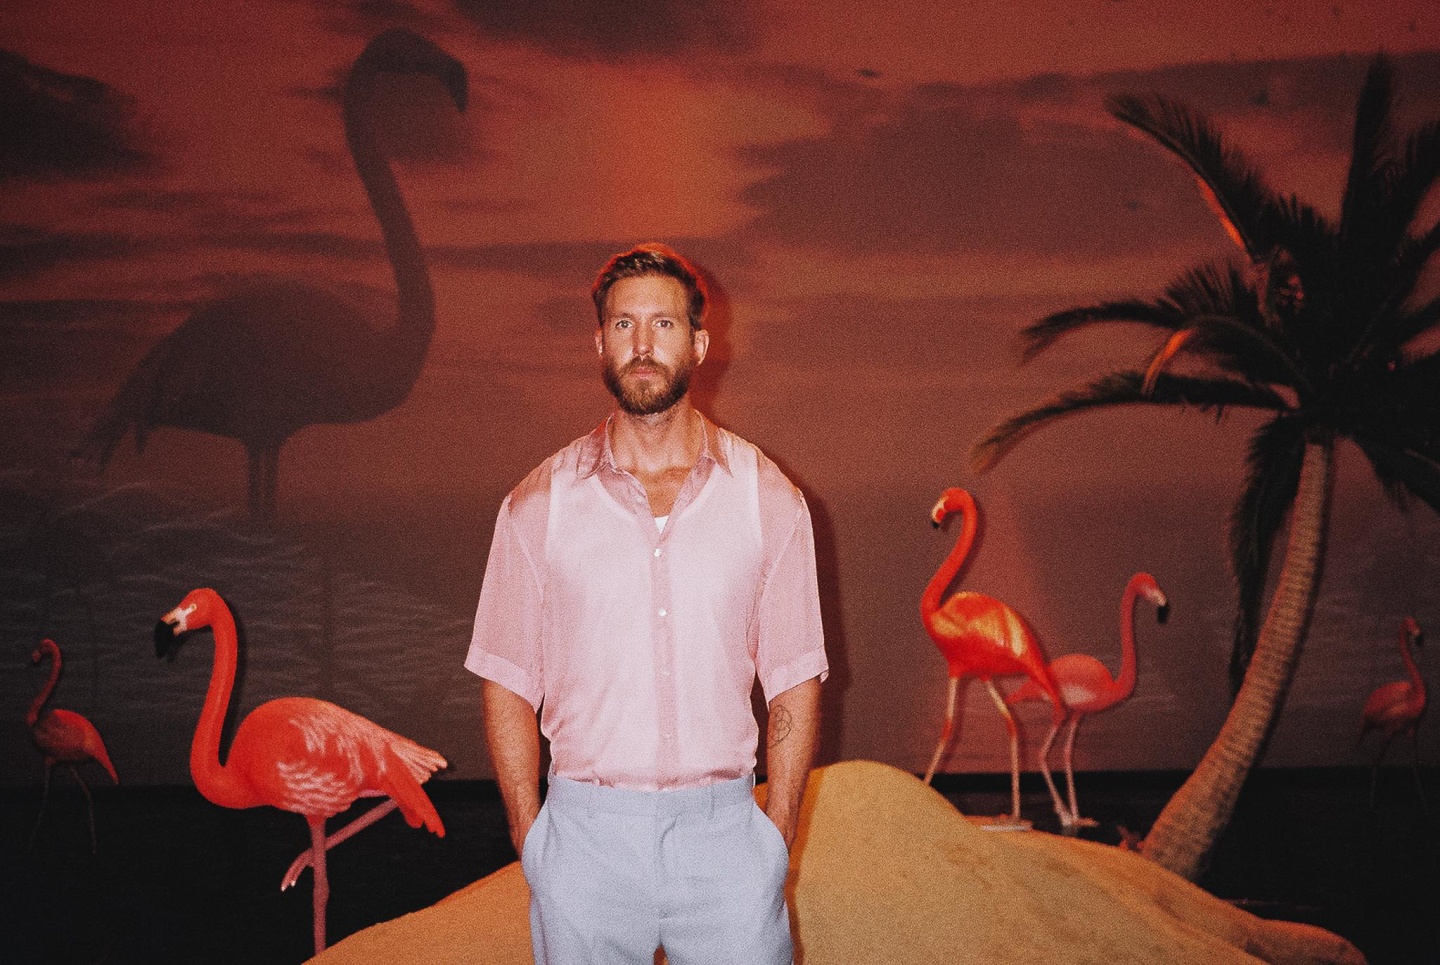 Calvin Harris and pop music’s search for connection